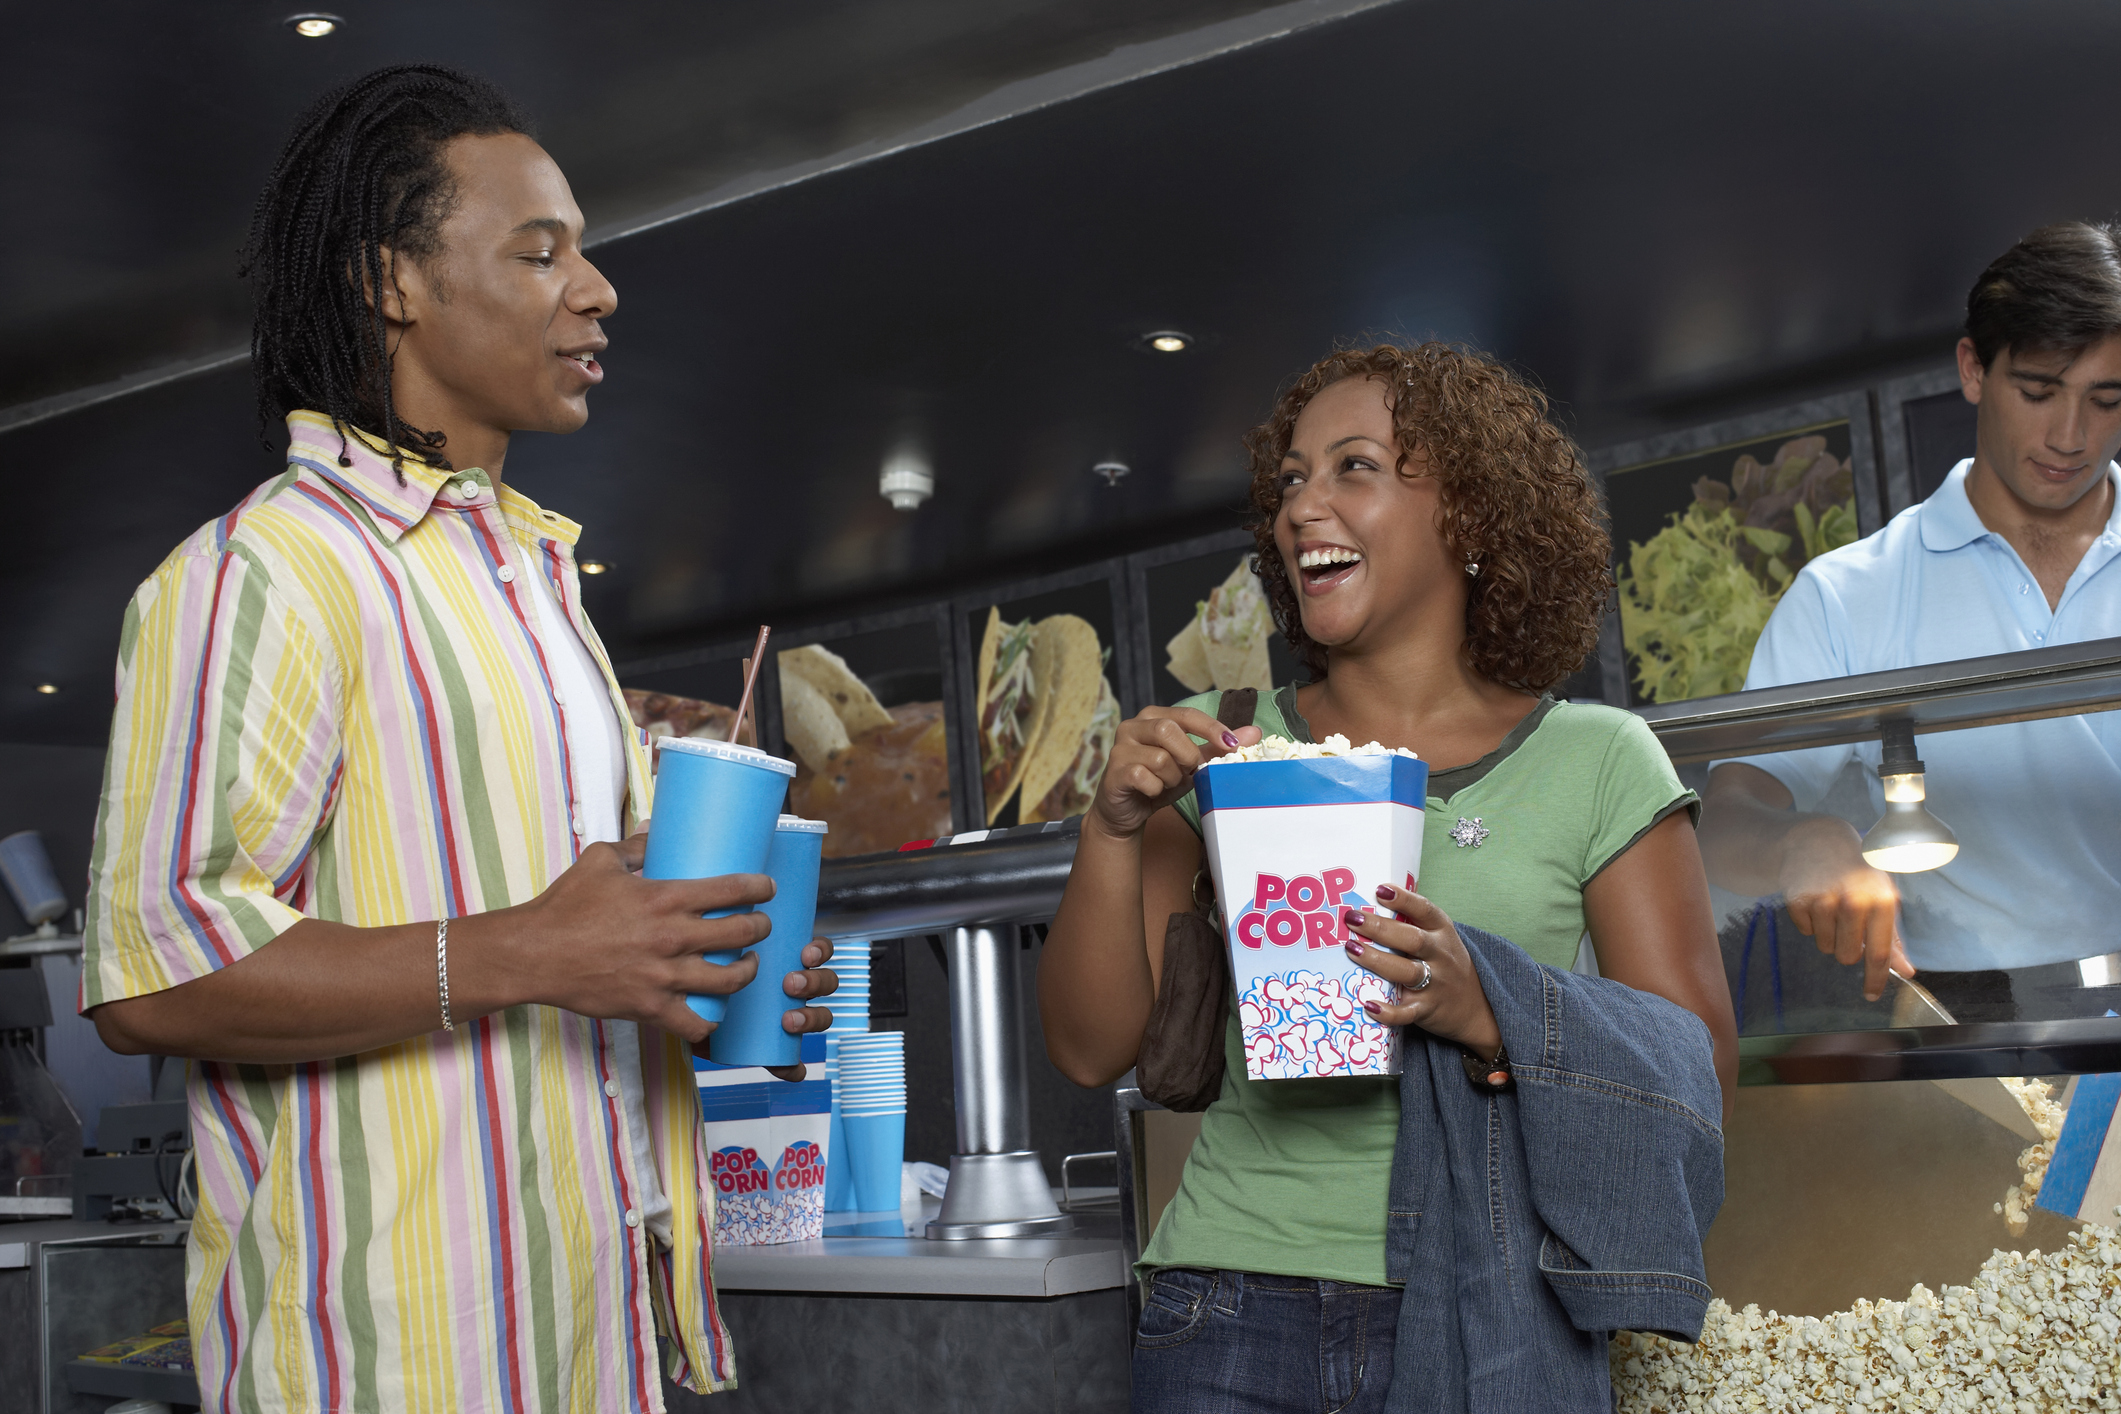 Couple Buying Popcorn and Soda at Movie Theater